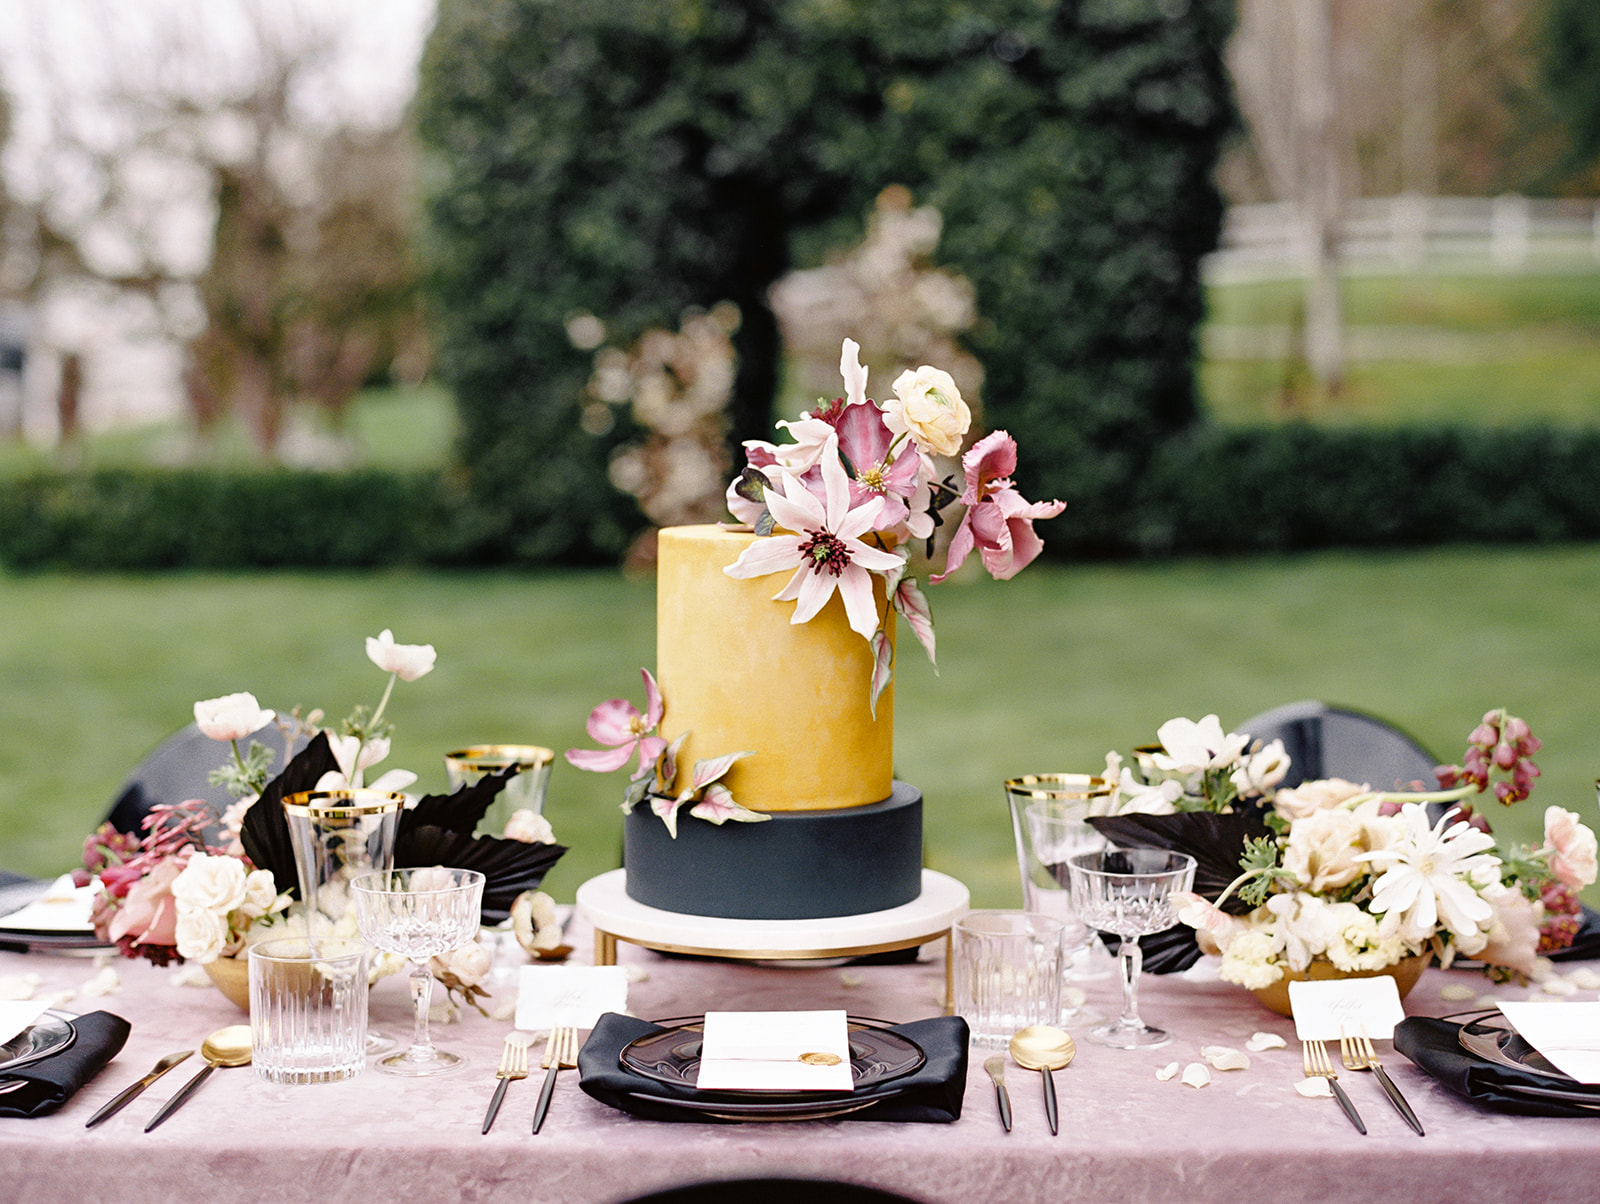 a table set with velvet linen, a cake with sugar flowers, and floral centerpieces